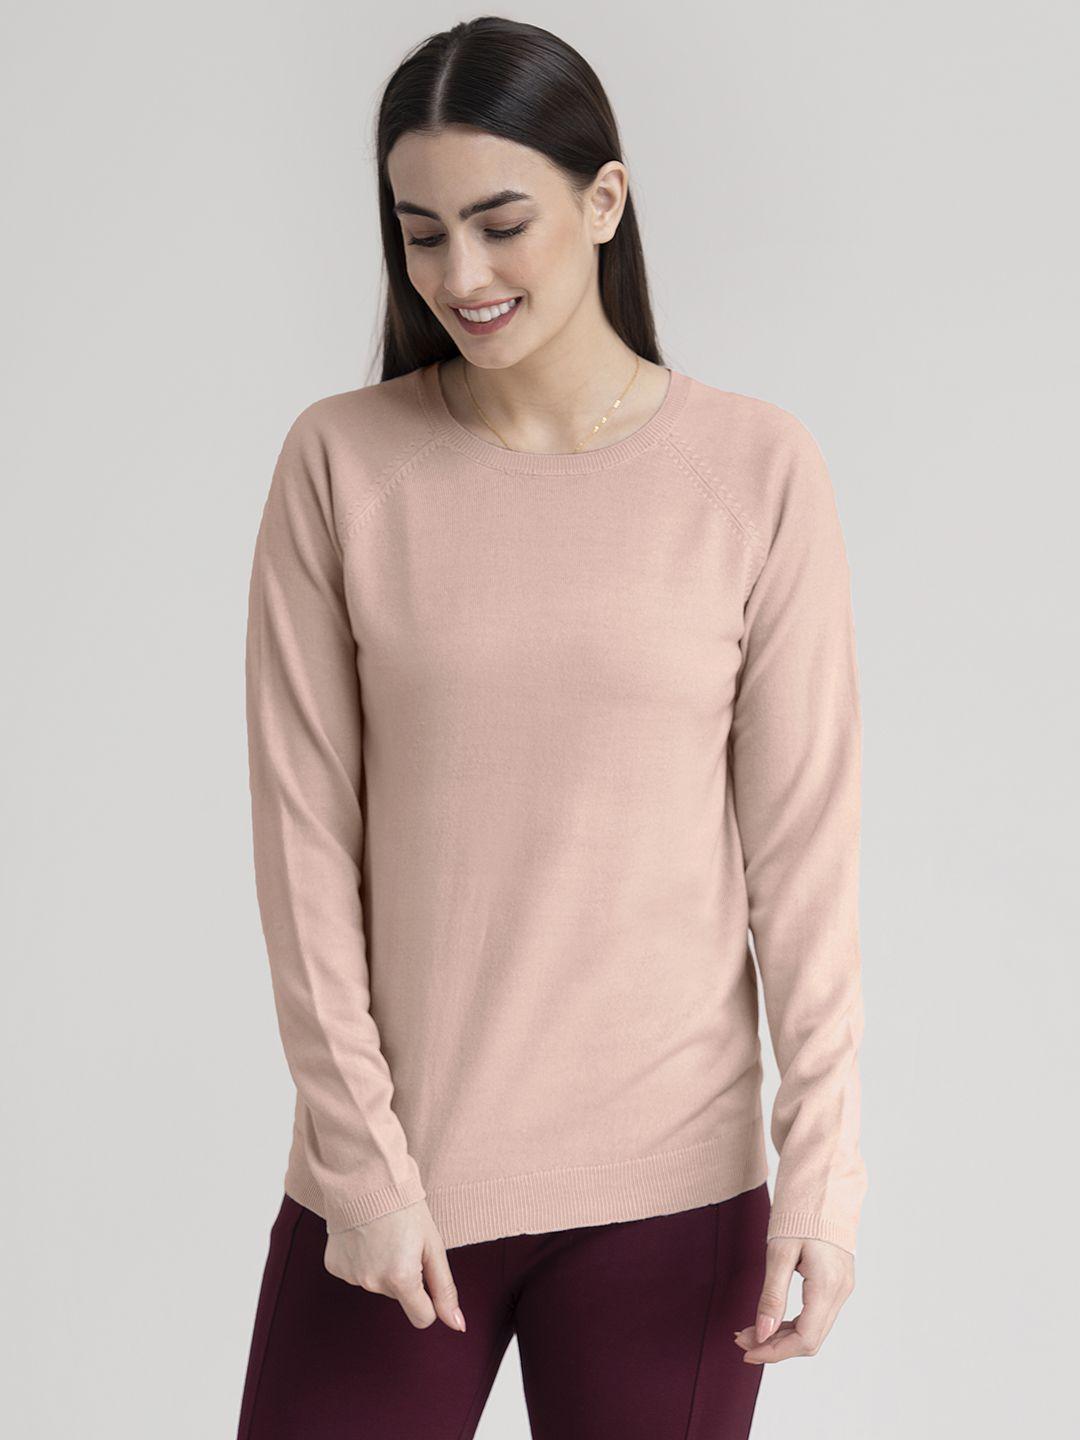 fablestreet women pink solid acrylic knit sweater